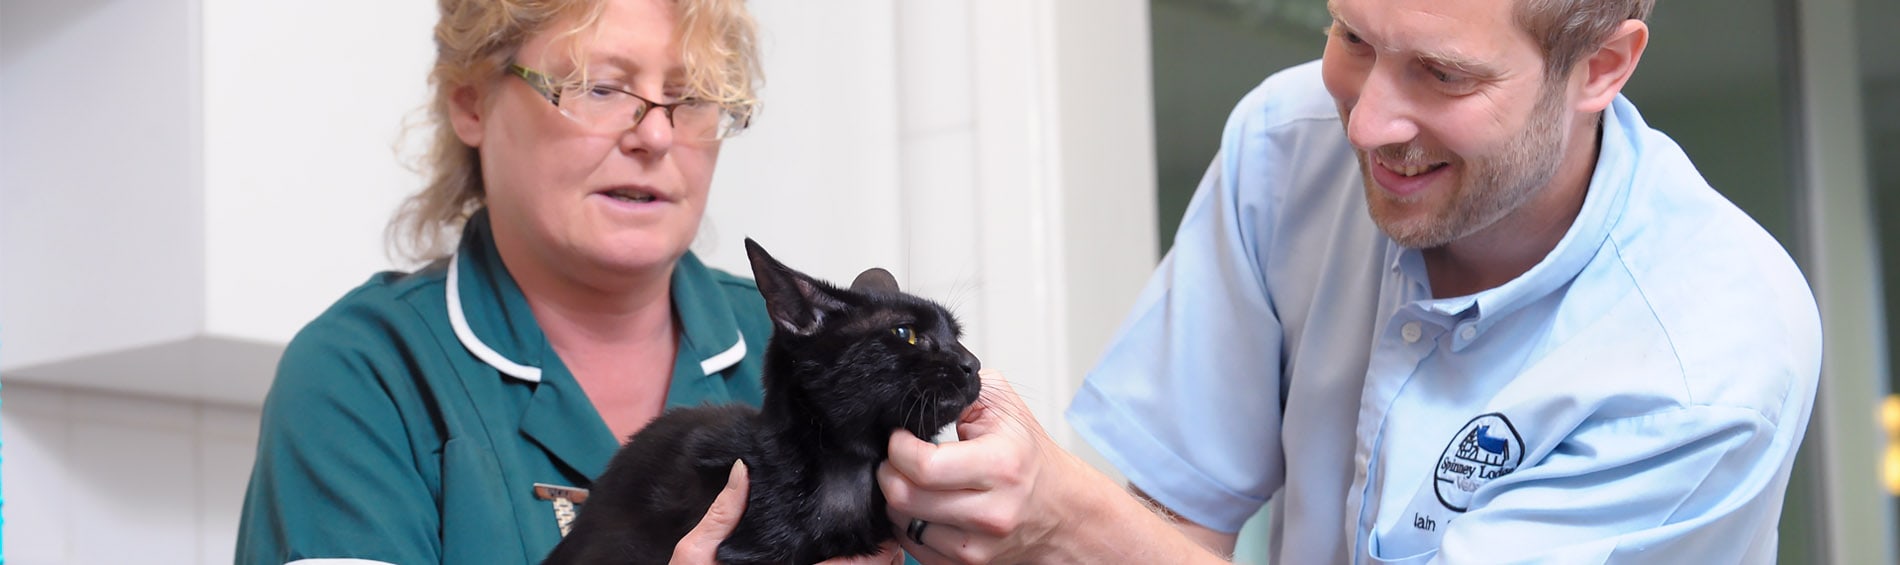 Signs of arthritis in cats | Spinney Vets